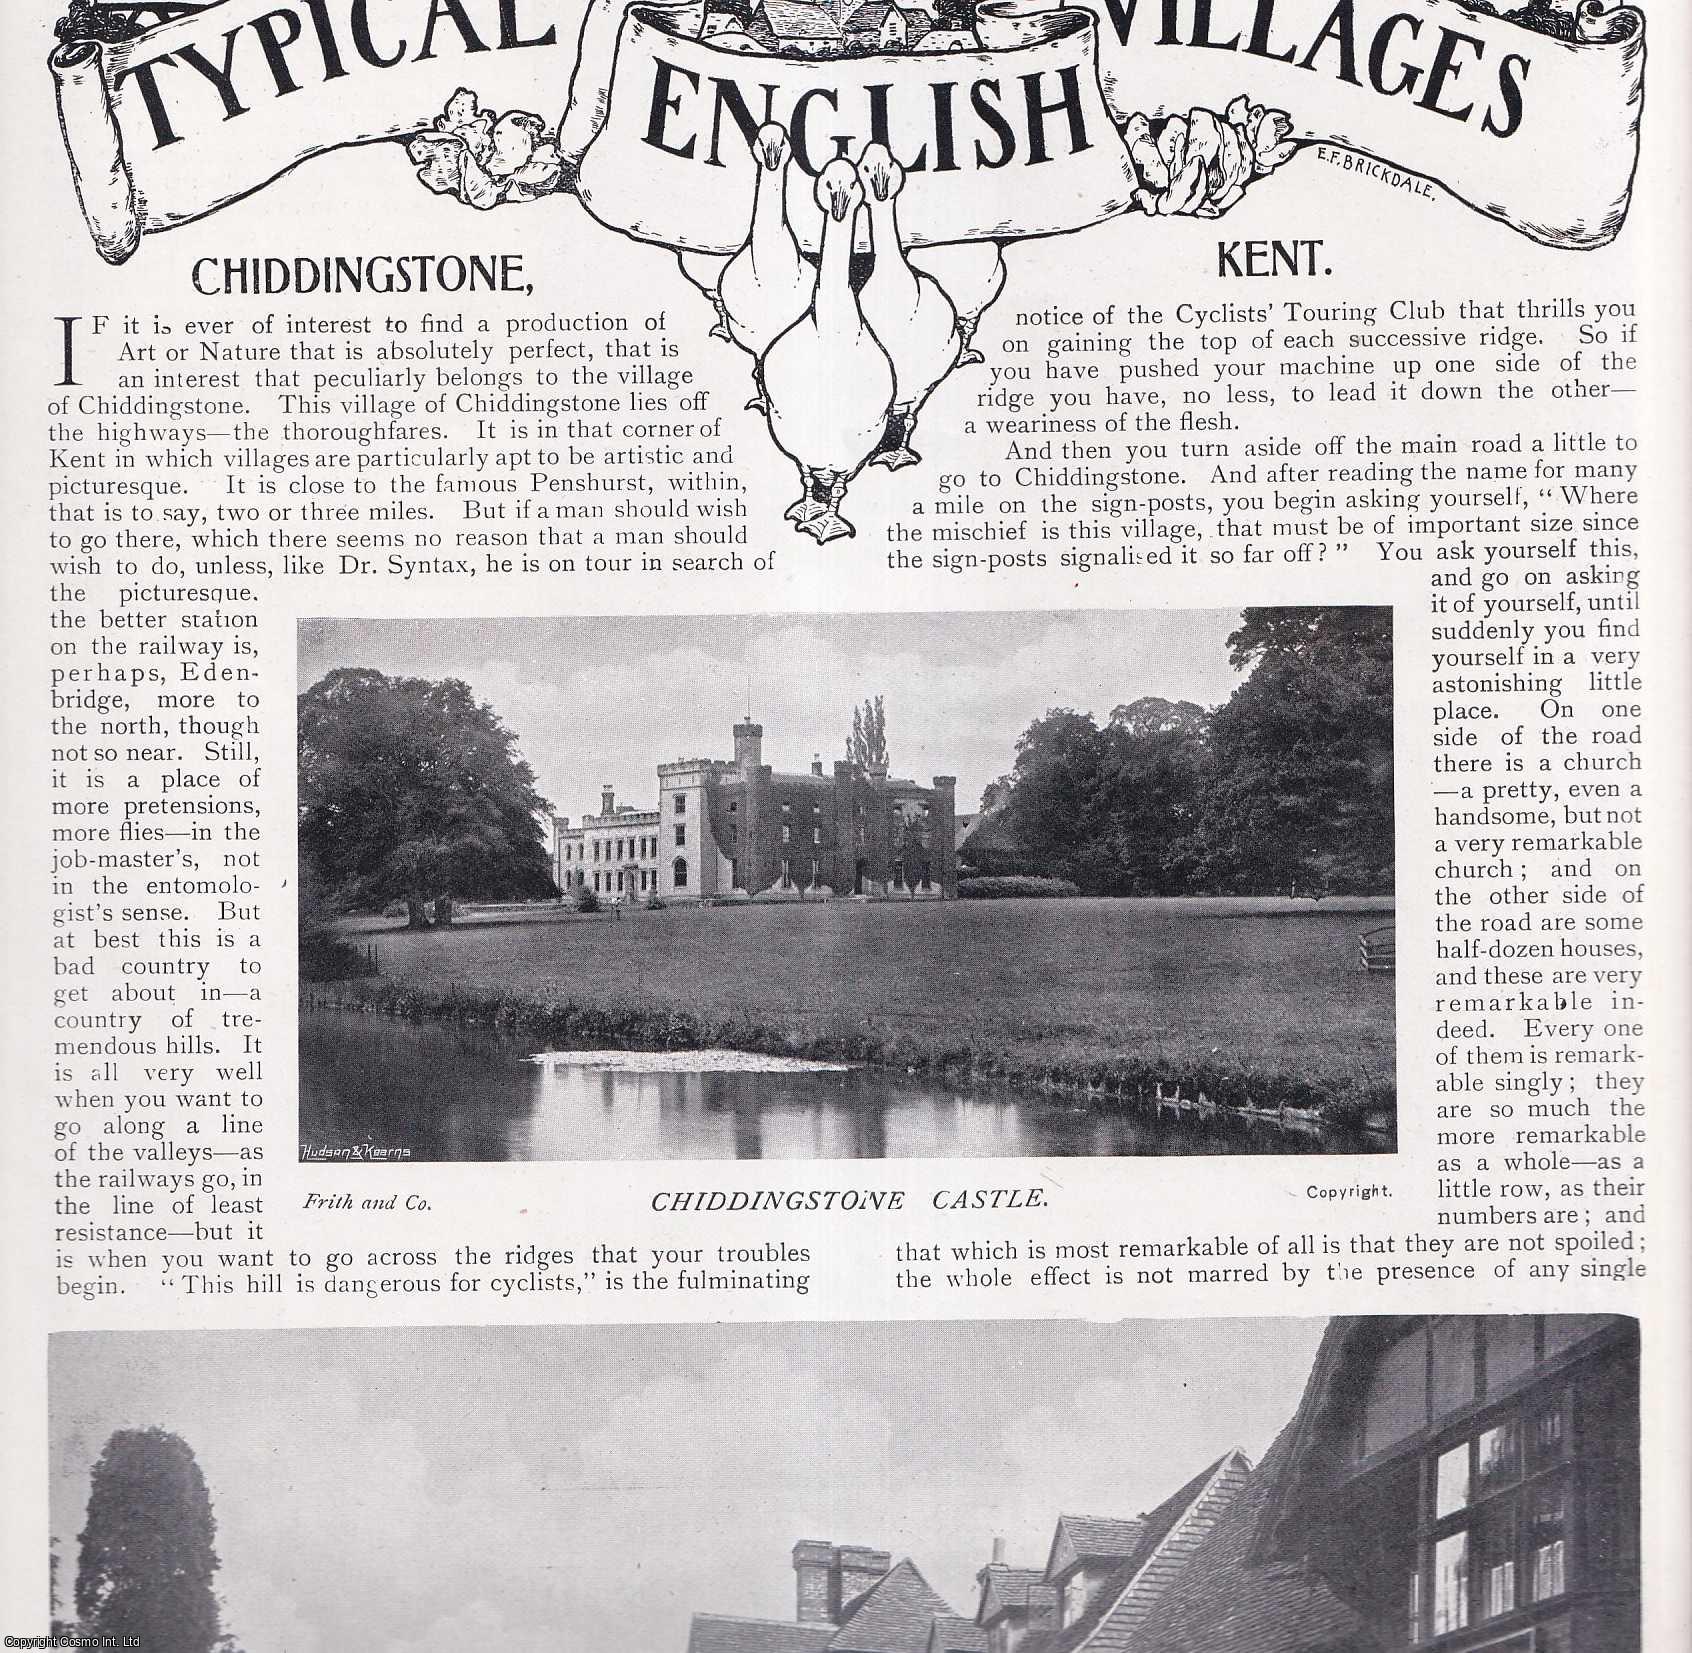 COUNTRY LIFE - Chiddingstone, Kent. Several pictures and accompanying text, removed from an original issue of Country Life Magazine, 1898.